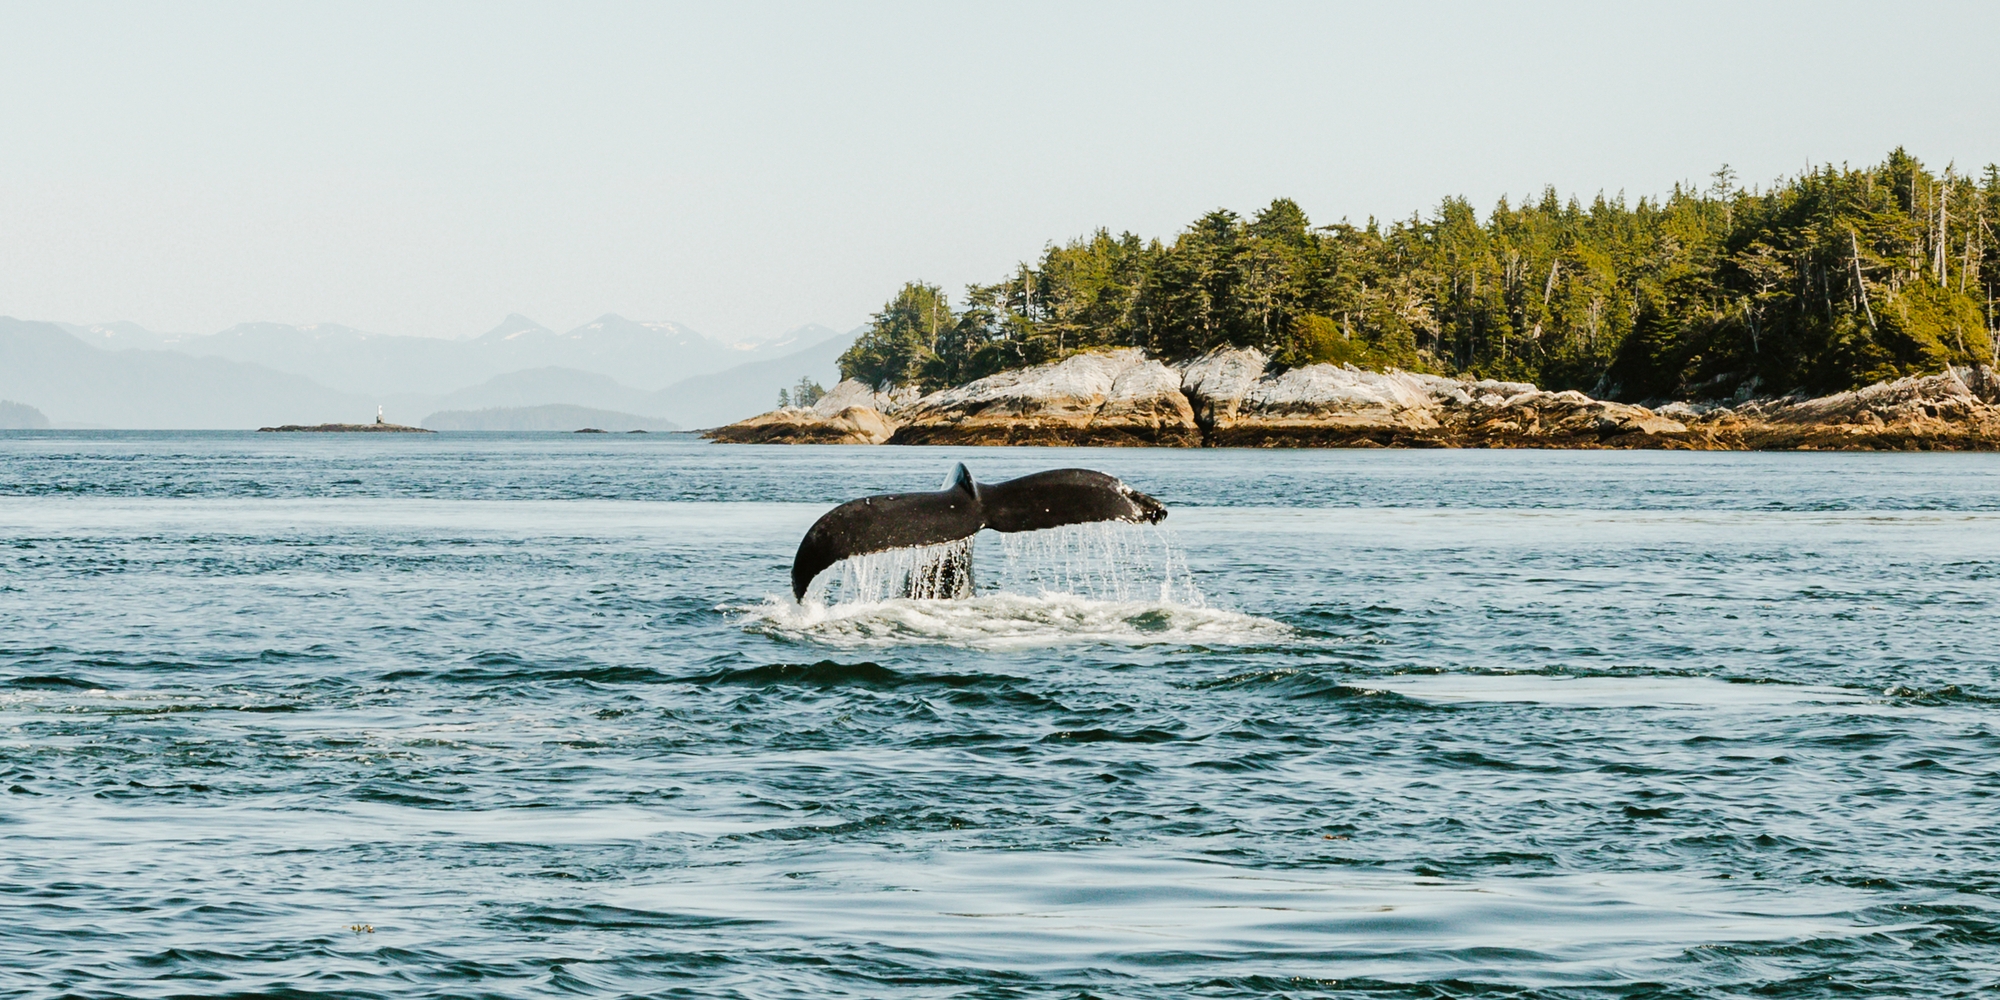 Whale watching off the coast of Prince Rupert | Northern BC Tourism/Shayd Johnson